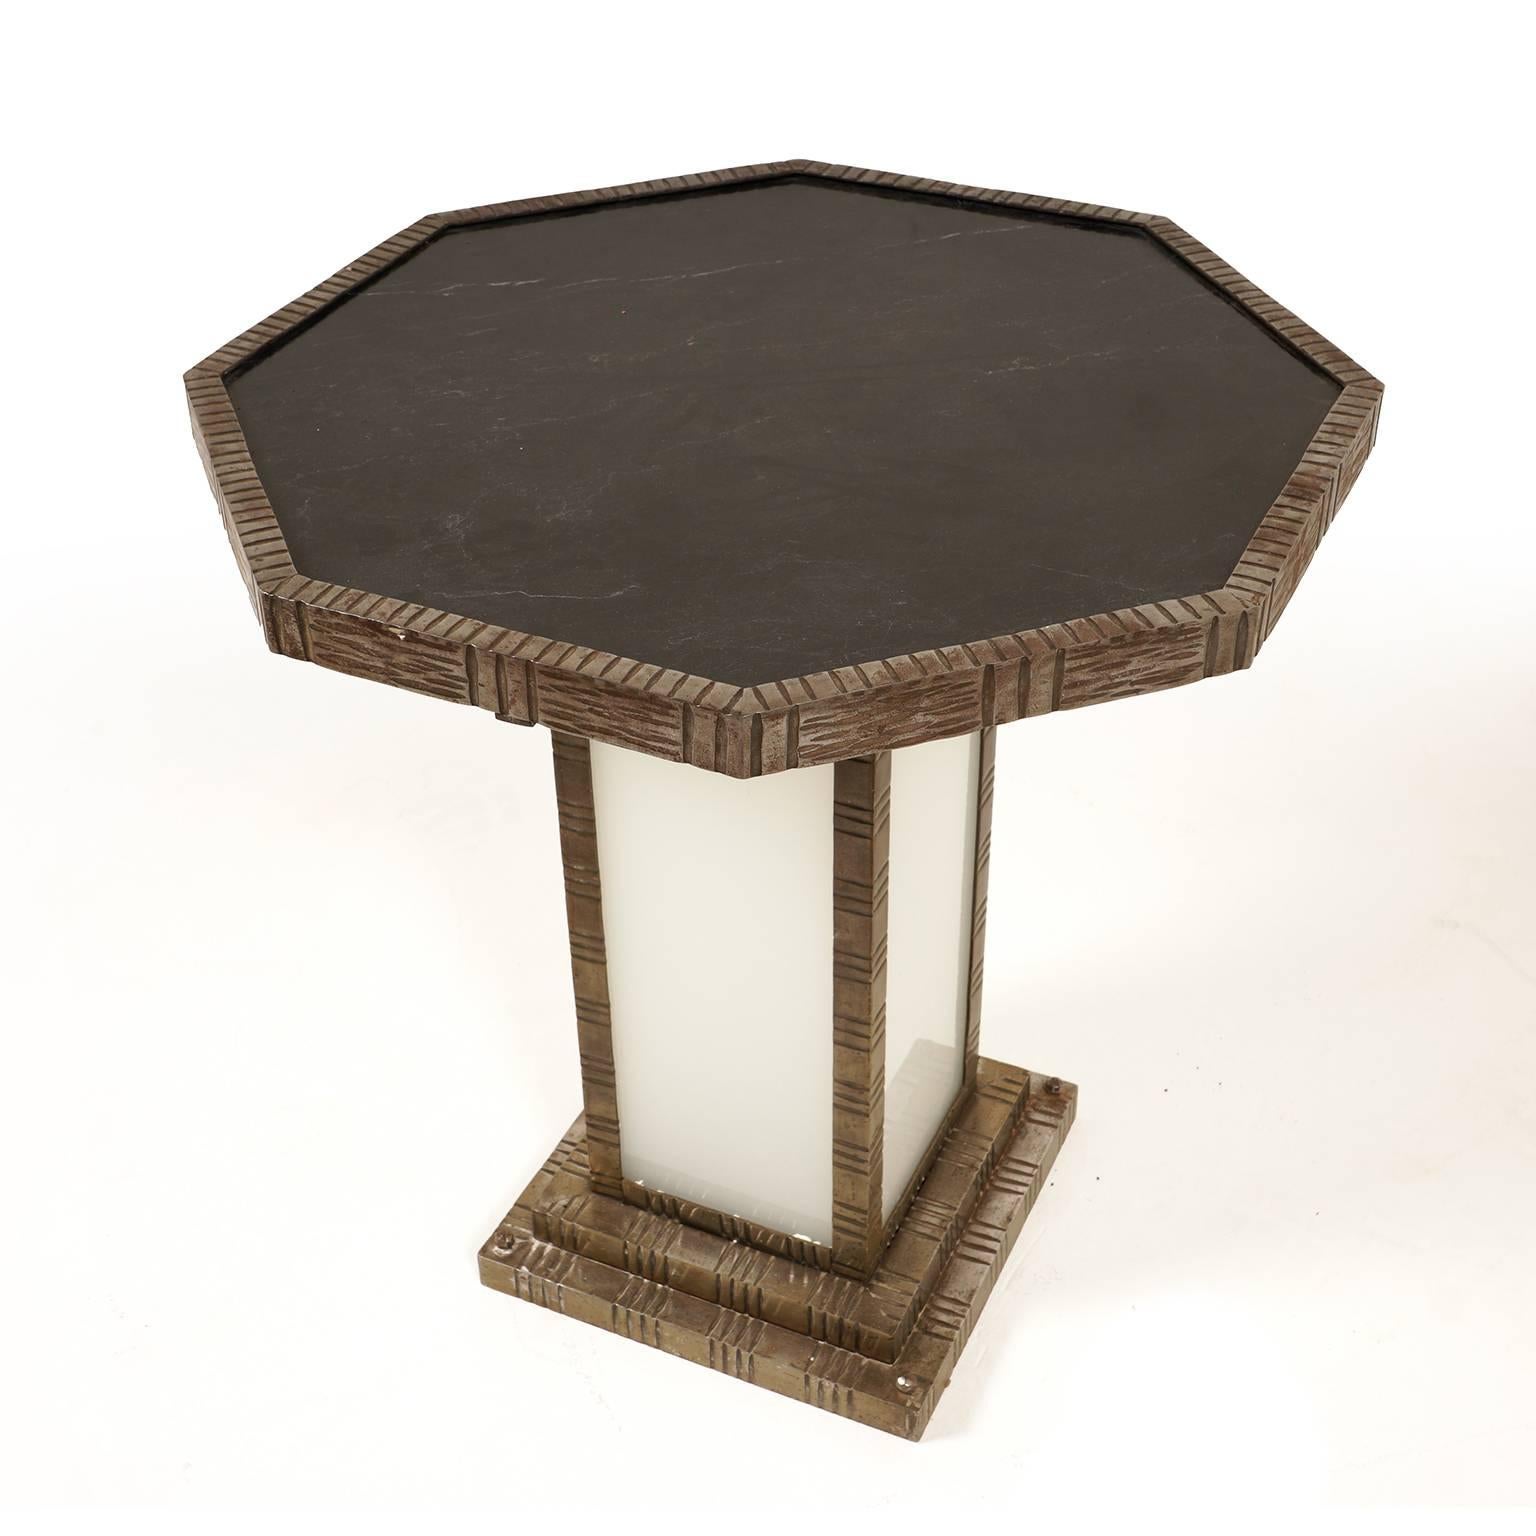 A French Art Deco octagonal side table, the marble top and base are framed in metal and the piece has an illuminating etched-glass base. Attributed to Edgar Brandt, Paris. Rewired for North American use, circa 1930.



